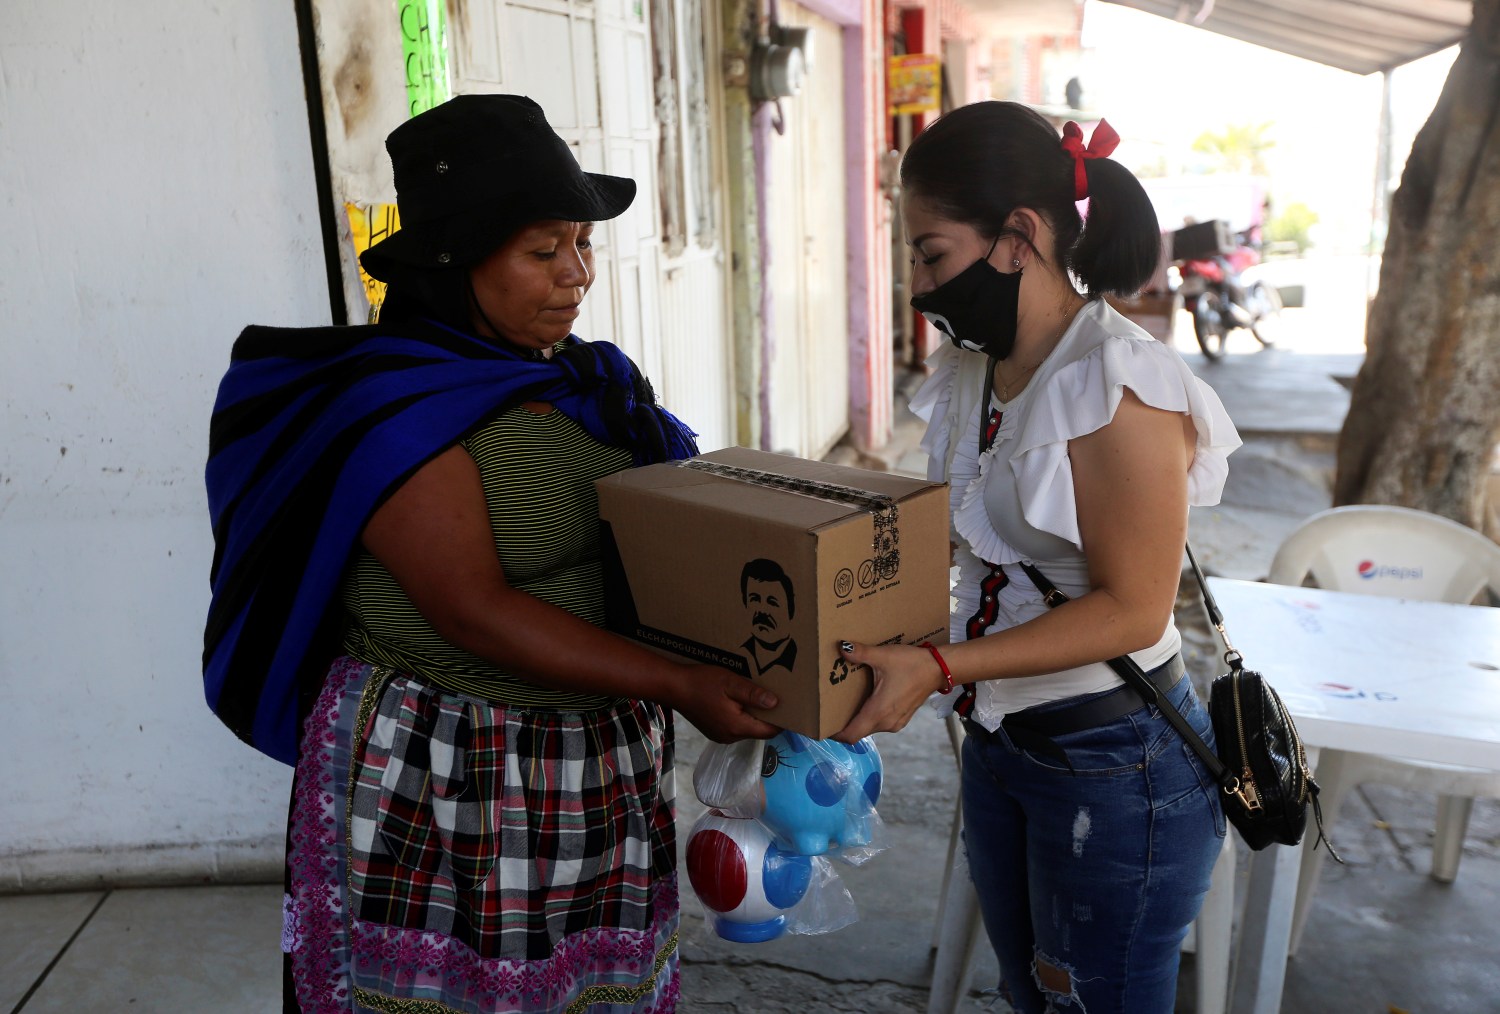 An employee of the clothing brand "El Chapo 701", owned by Alejandrina Gisselle Guzman, daughter of the convicted drug kingpin Joaquin "El Chapo" Guzman, hands out a box with food, face masks and hand sanitizer to an elderly woman as part of a campaign to help cash-strapped elderly people during the coronavirus disease (COVID-19) outbreak, in Guadalajara, Mexico April 16, 2020. The number 701 refers to the 2009 World's Billionaires ranking given by Forbes magazine to Mexican drug lord Joaquin "El Chapo" Guzman. REUTERS/Fernando Carranza